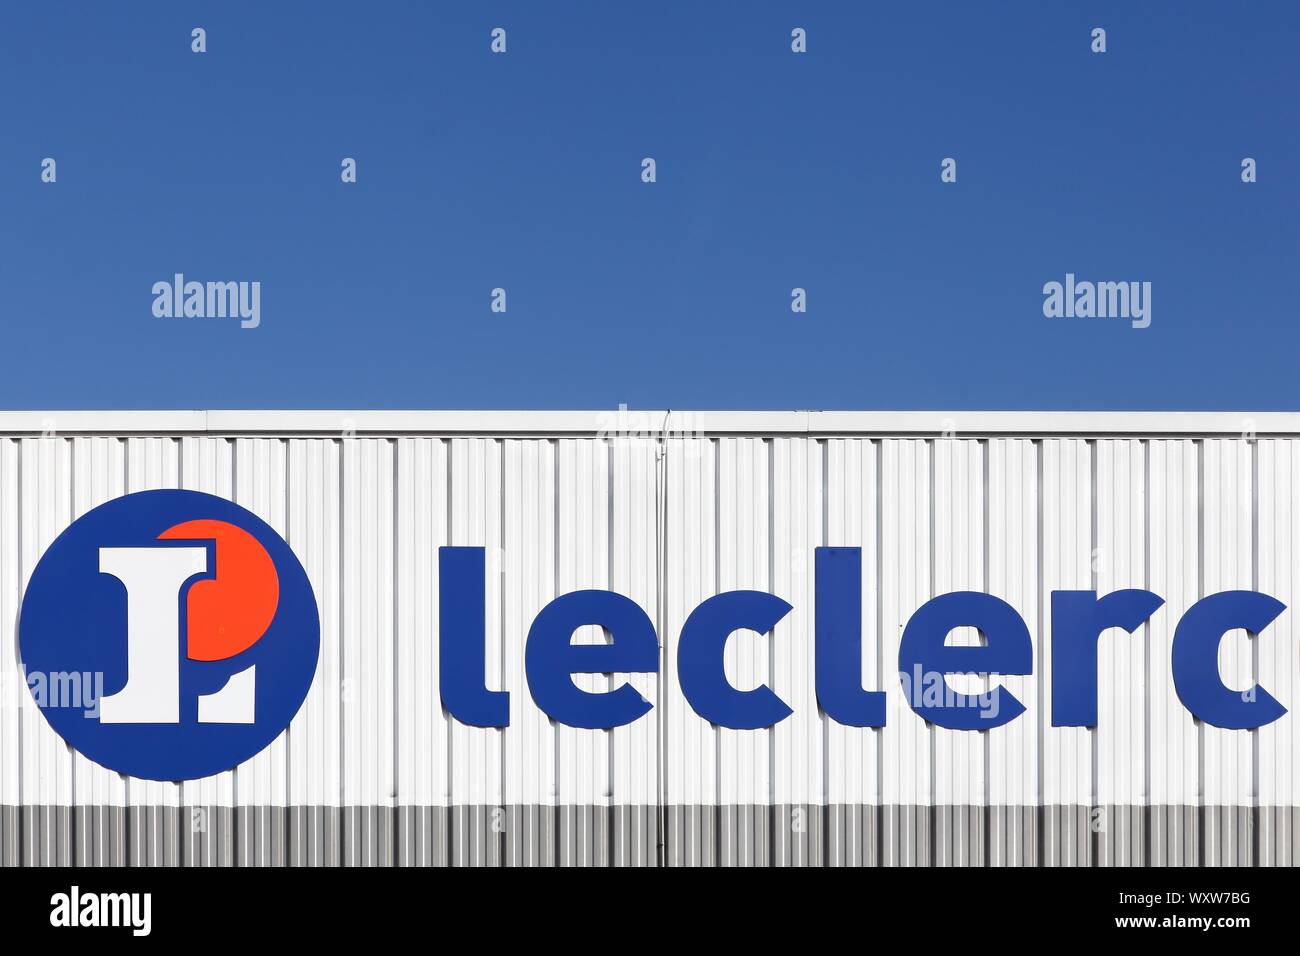 Miribel, France - January 30, 2016: Leclerc logo on a facade. Leclerc is a french hypermarket chain Stock Photo